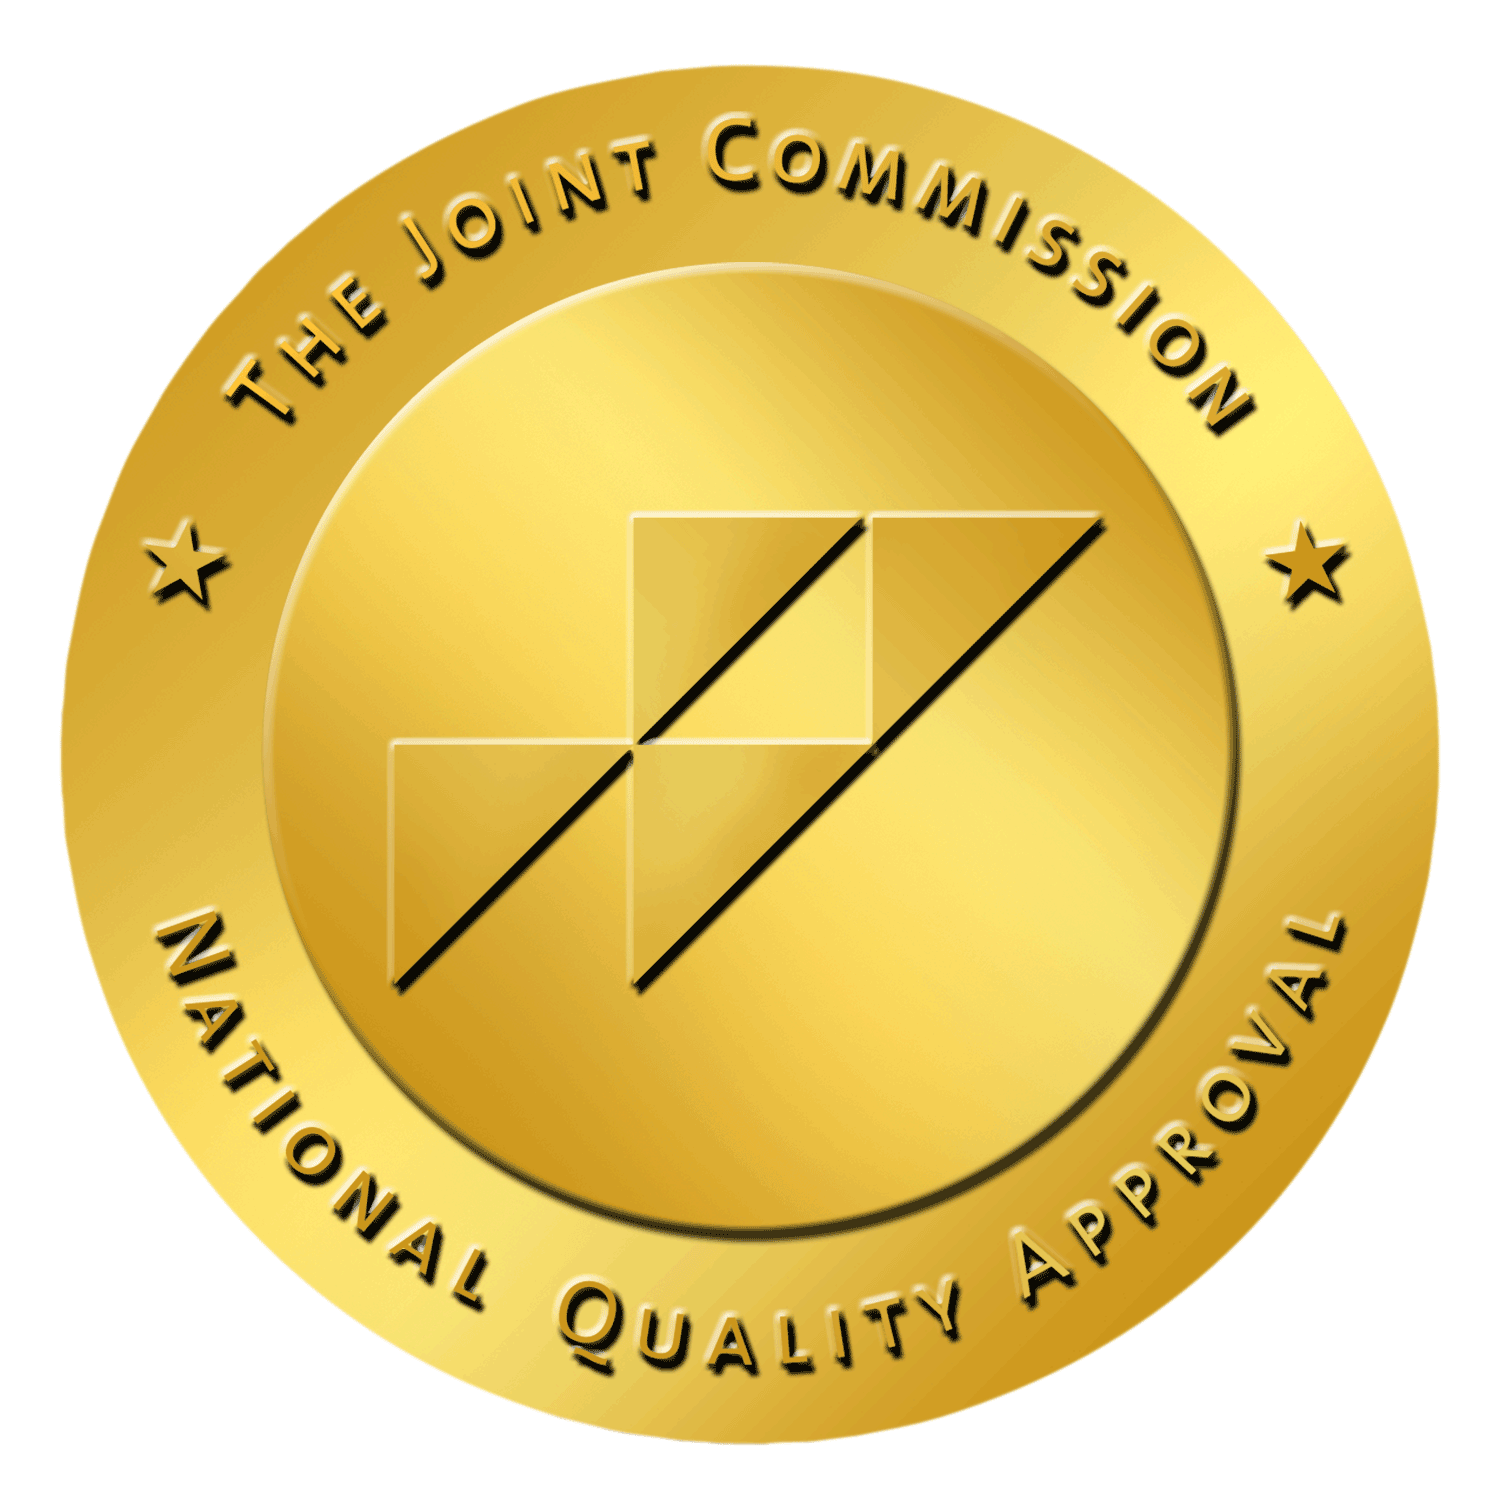 Image of the Gold Seal of Approval from The Joint Commission for Stroke Center click to learn more 